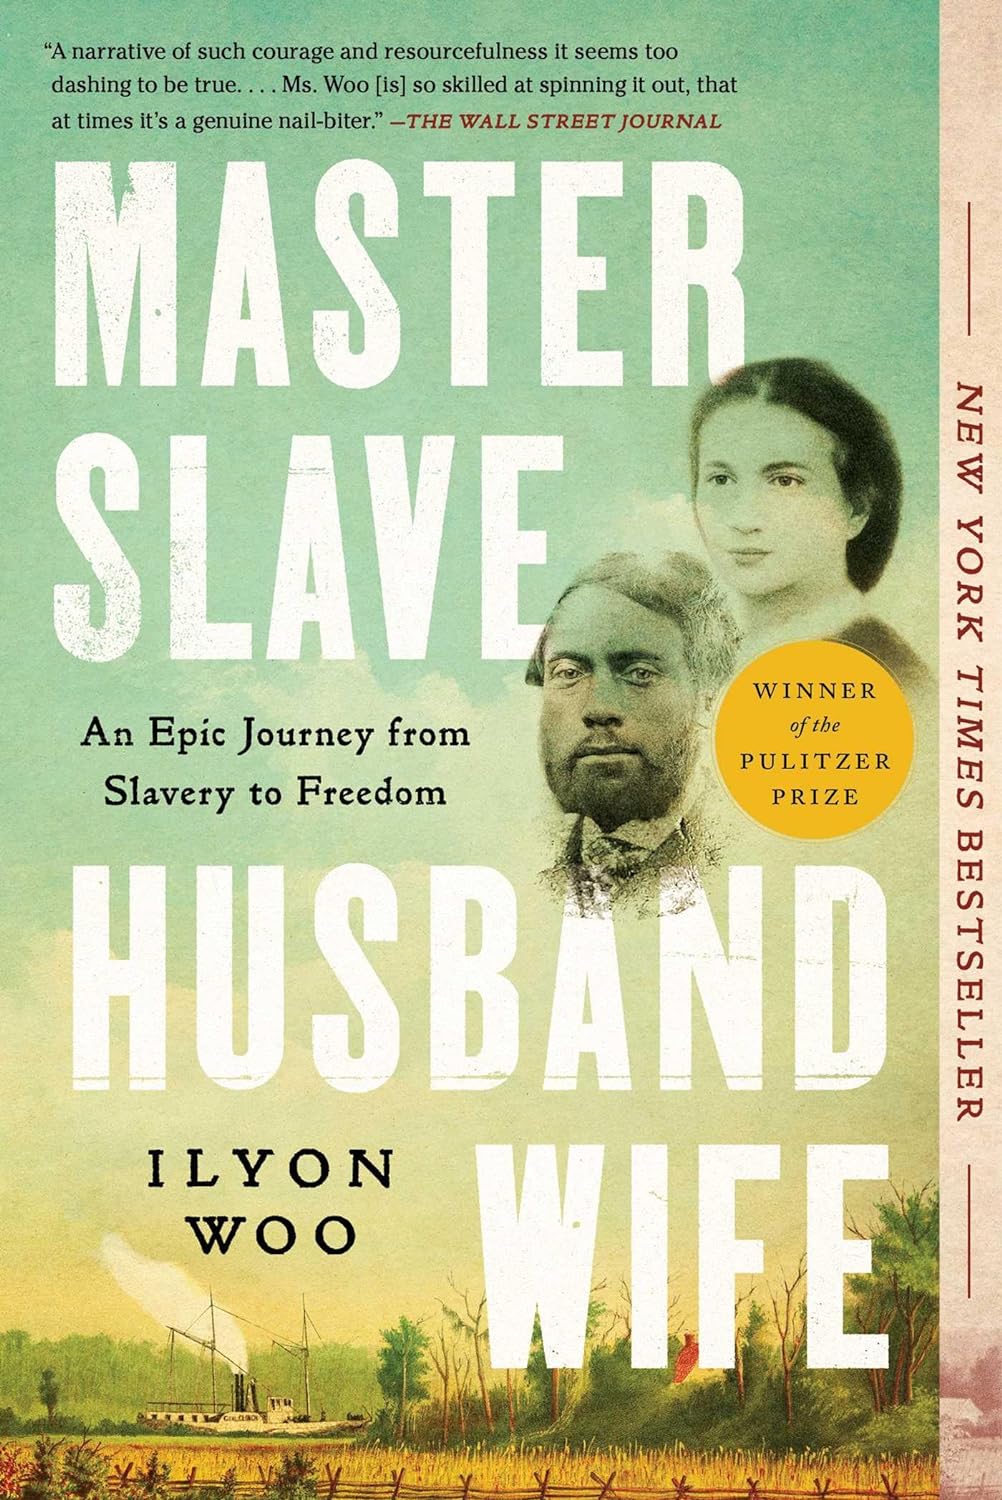 Master slave, husband wife : an epic journey from slavery to freedom 책표지